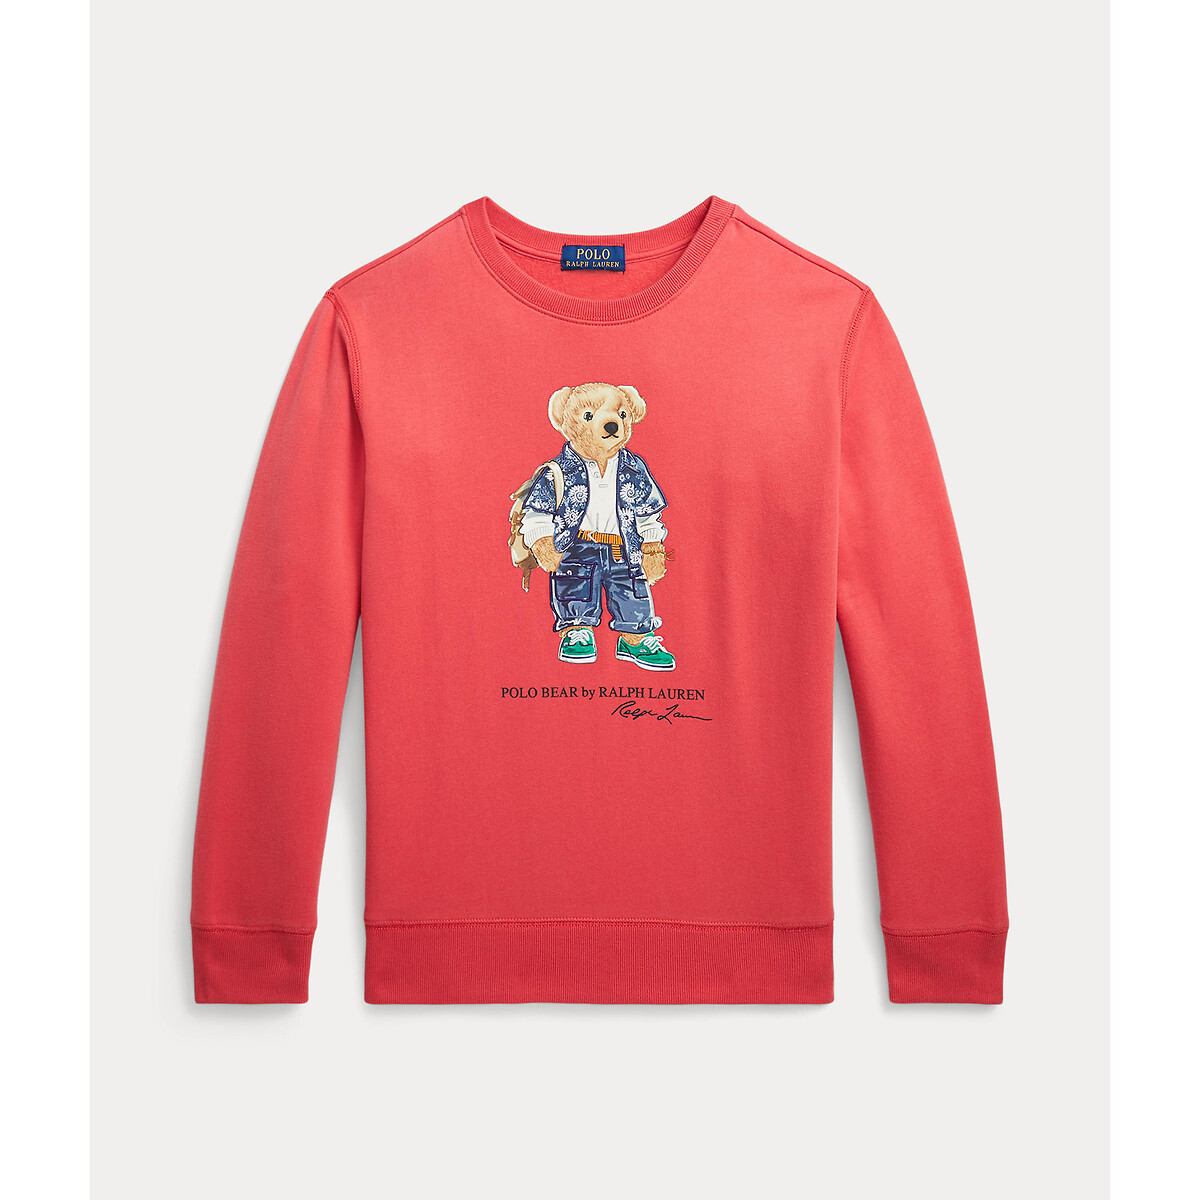 Image of Polo Bear Sweatshirt in Cotton Mix with Crew Neck